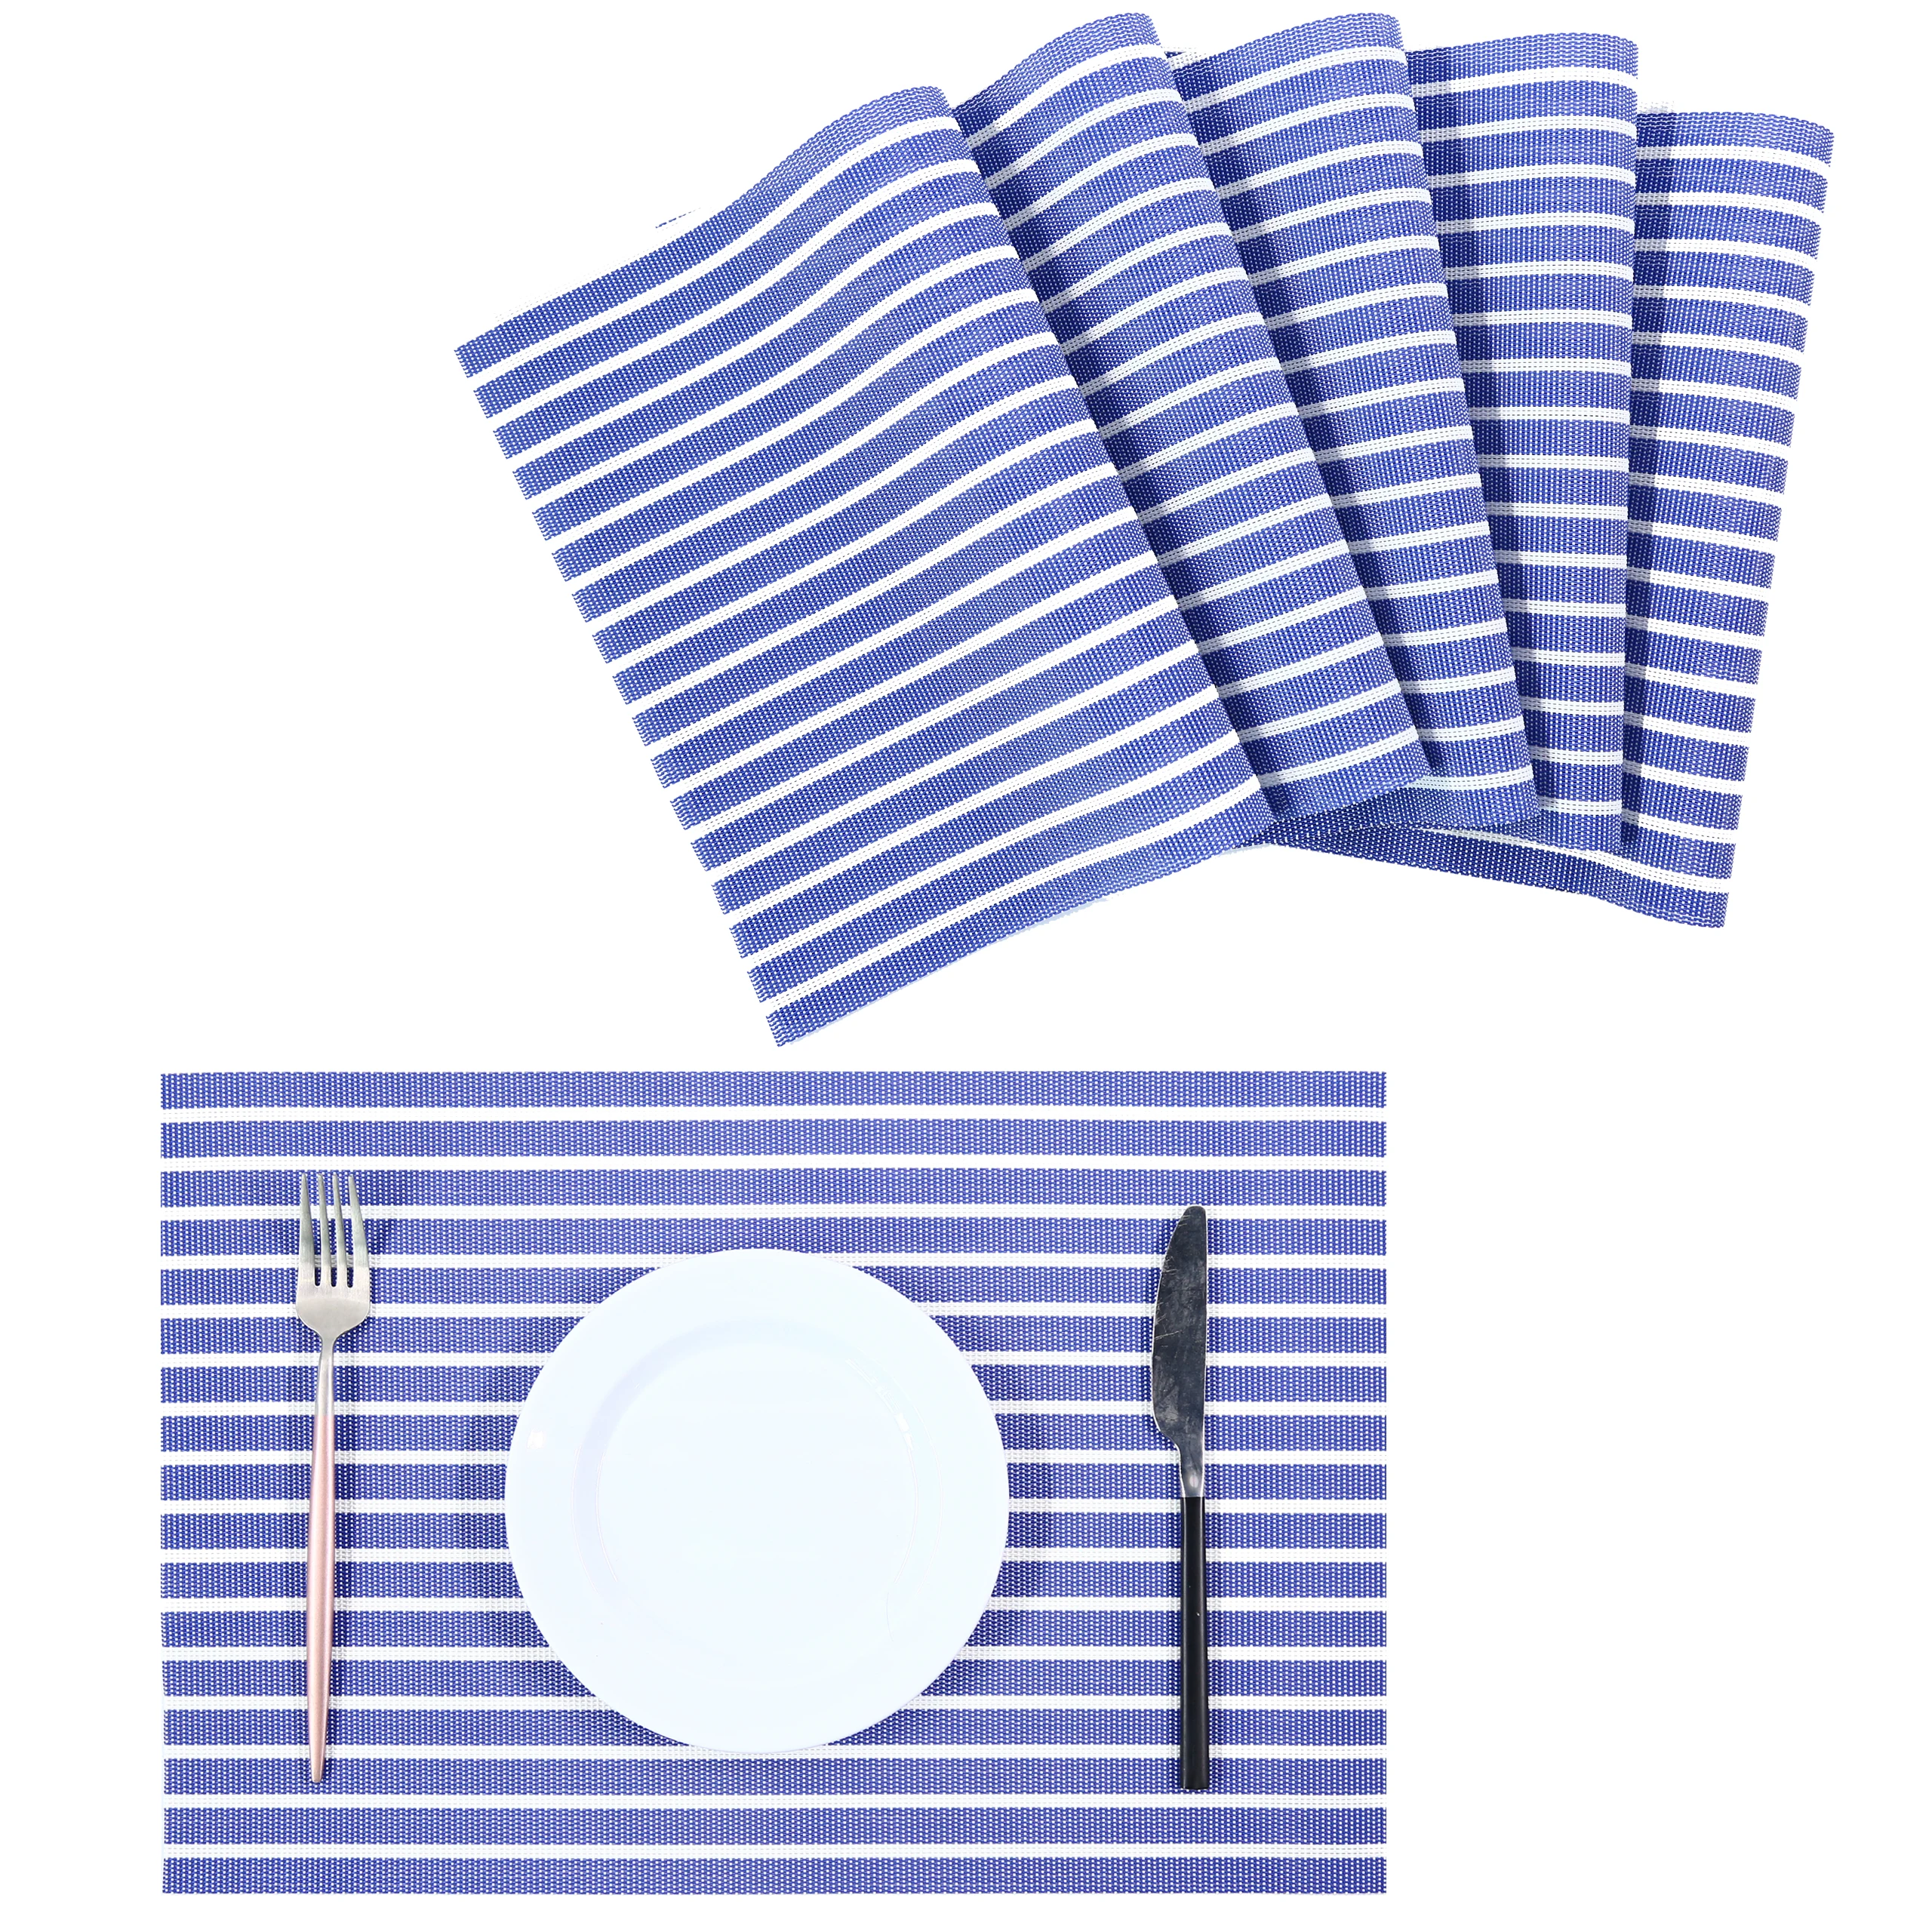 

Tabletex PVC Woven Placemats Customized Size Plastic PVC Vinyl Woven Hot Food Placemat Dining Table Mat Restaurant